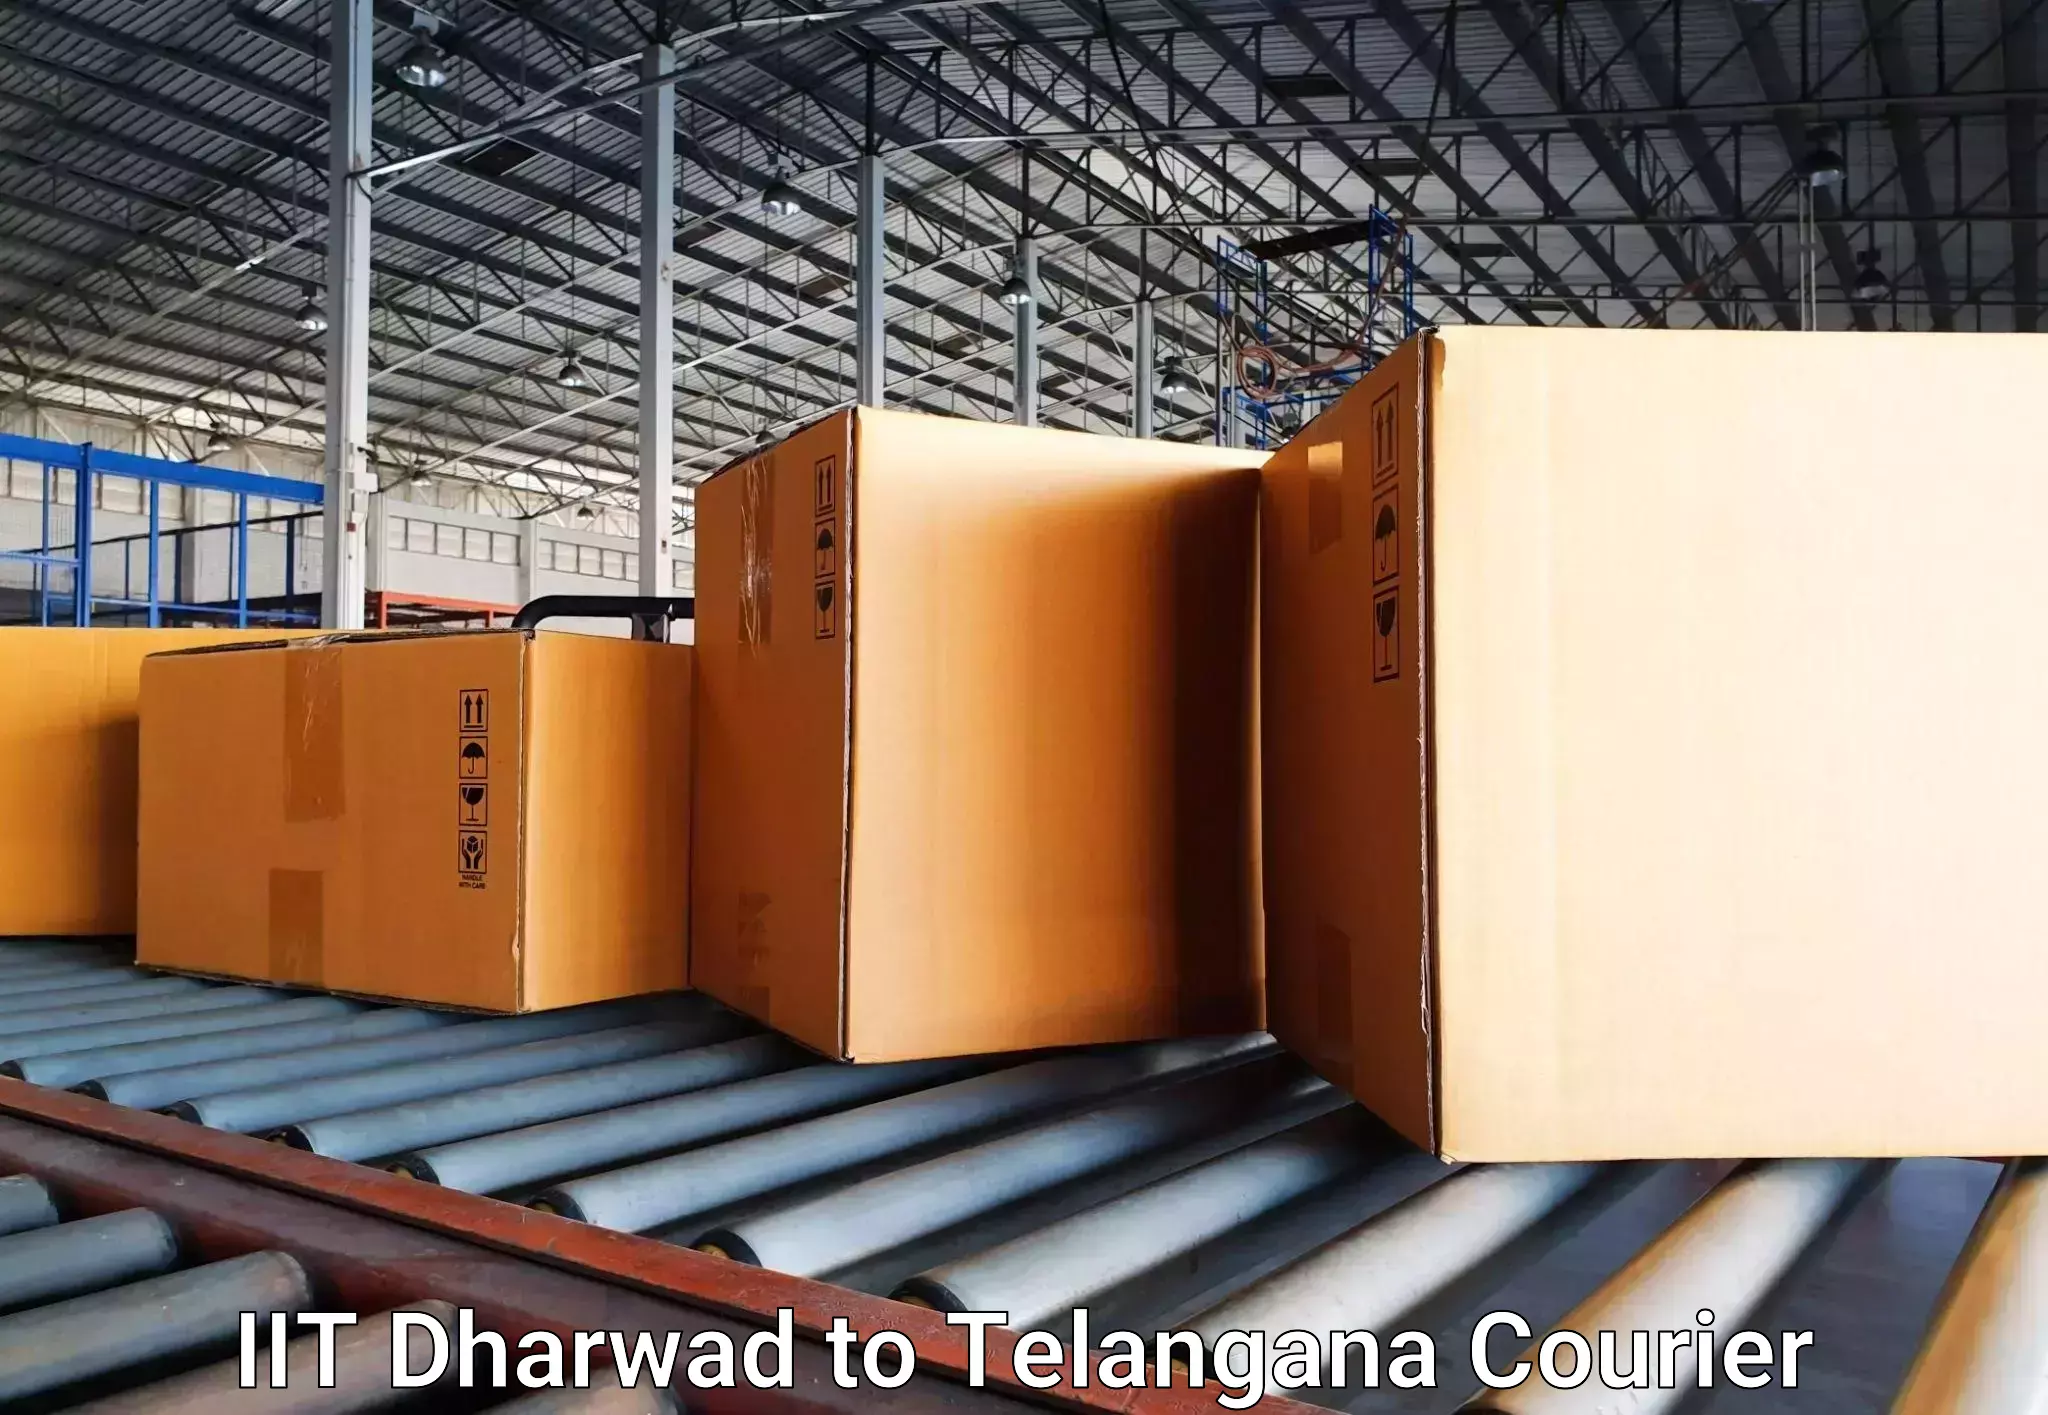 Instant baggage transport quote IIT Dharwad to Sikanderguda